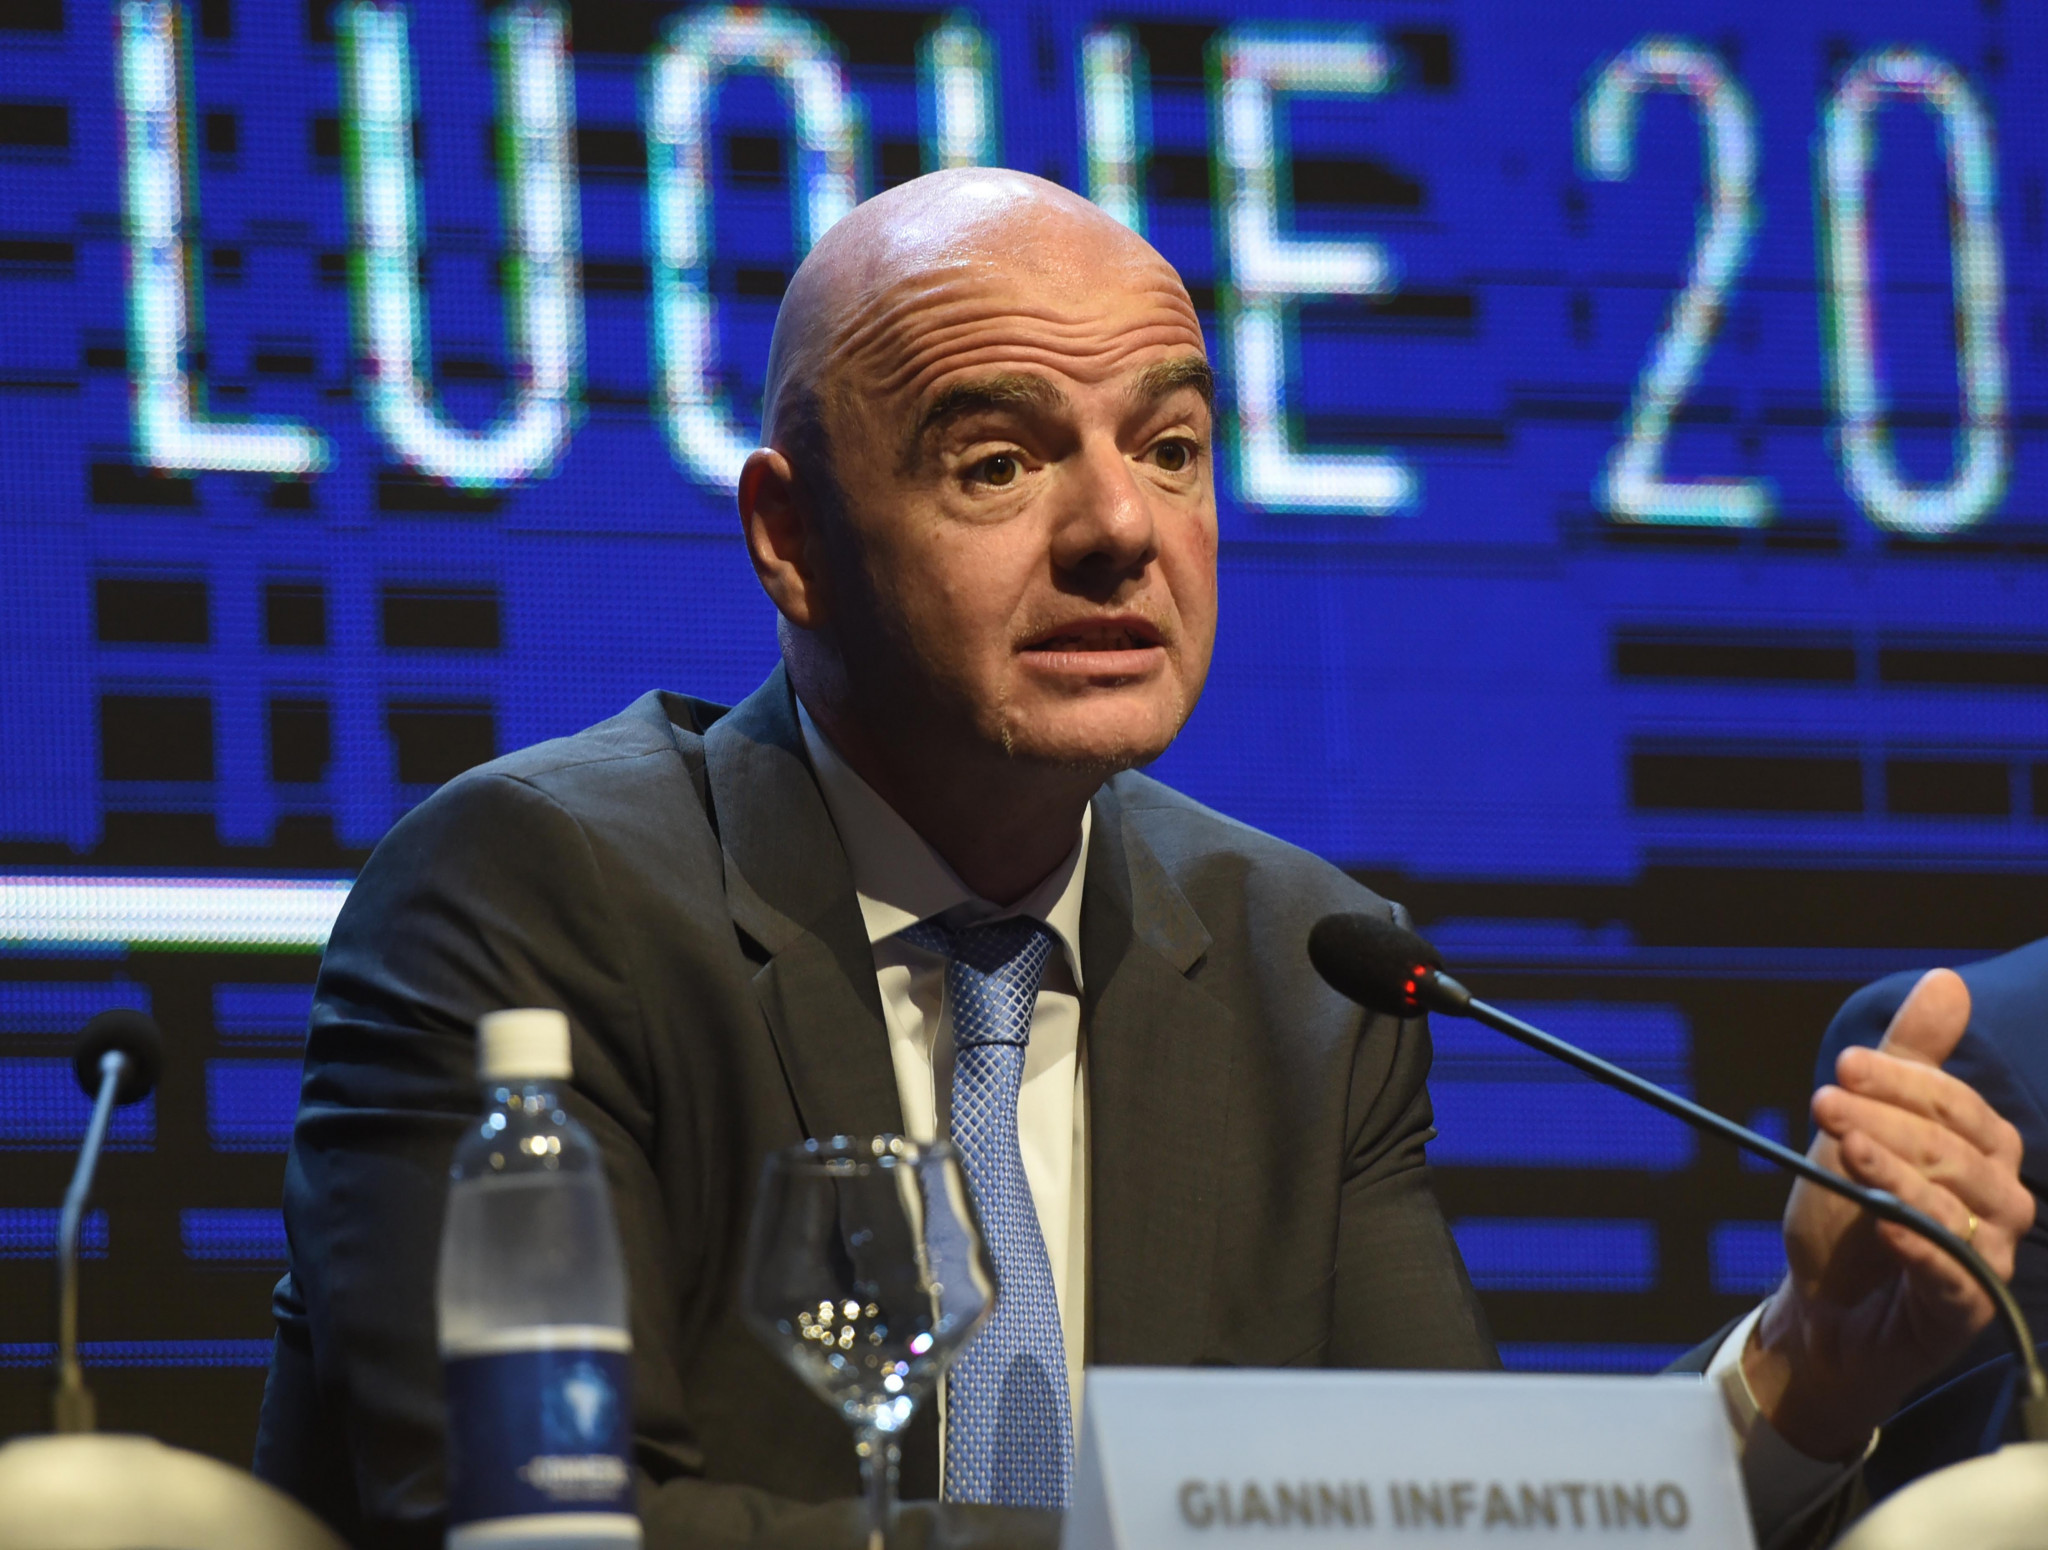 Infantino casts doubt on possible 2022 World Cup growth to 48 teams